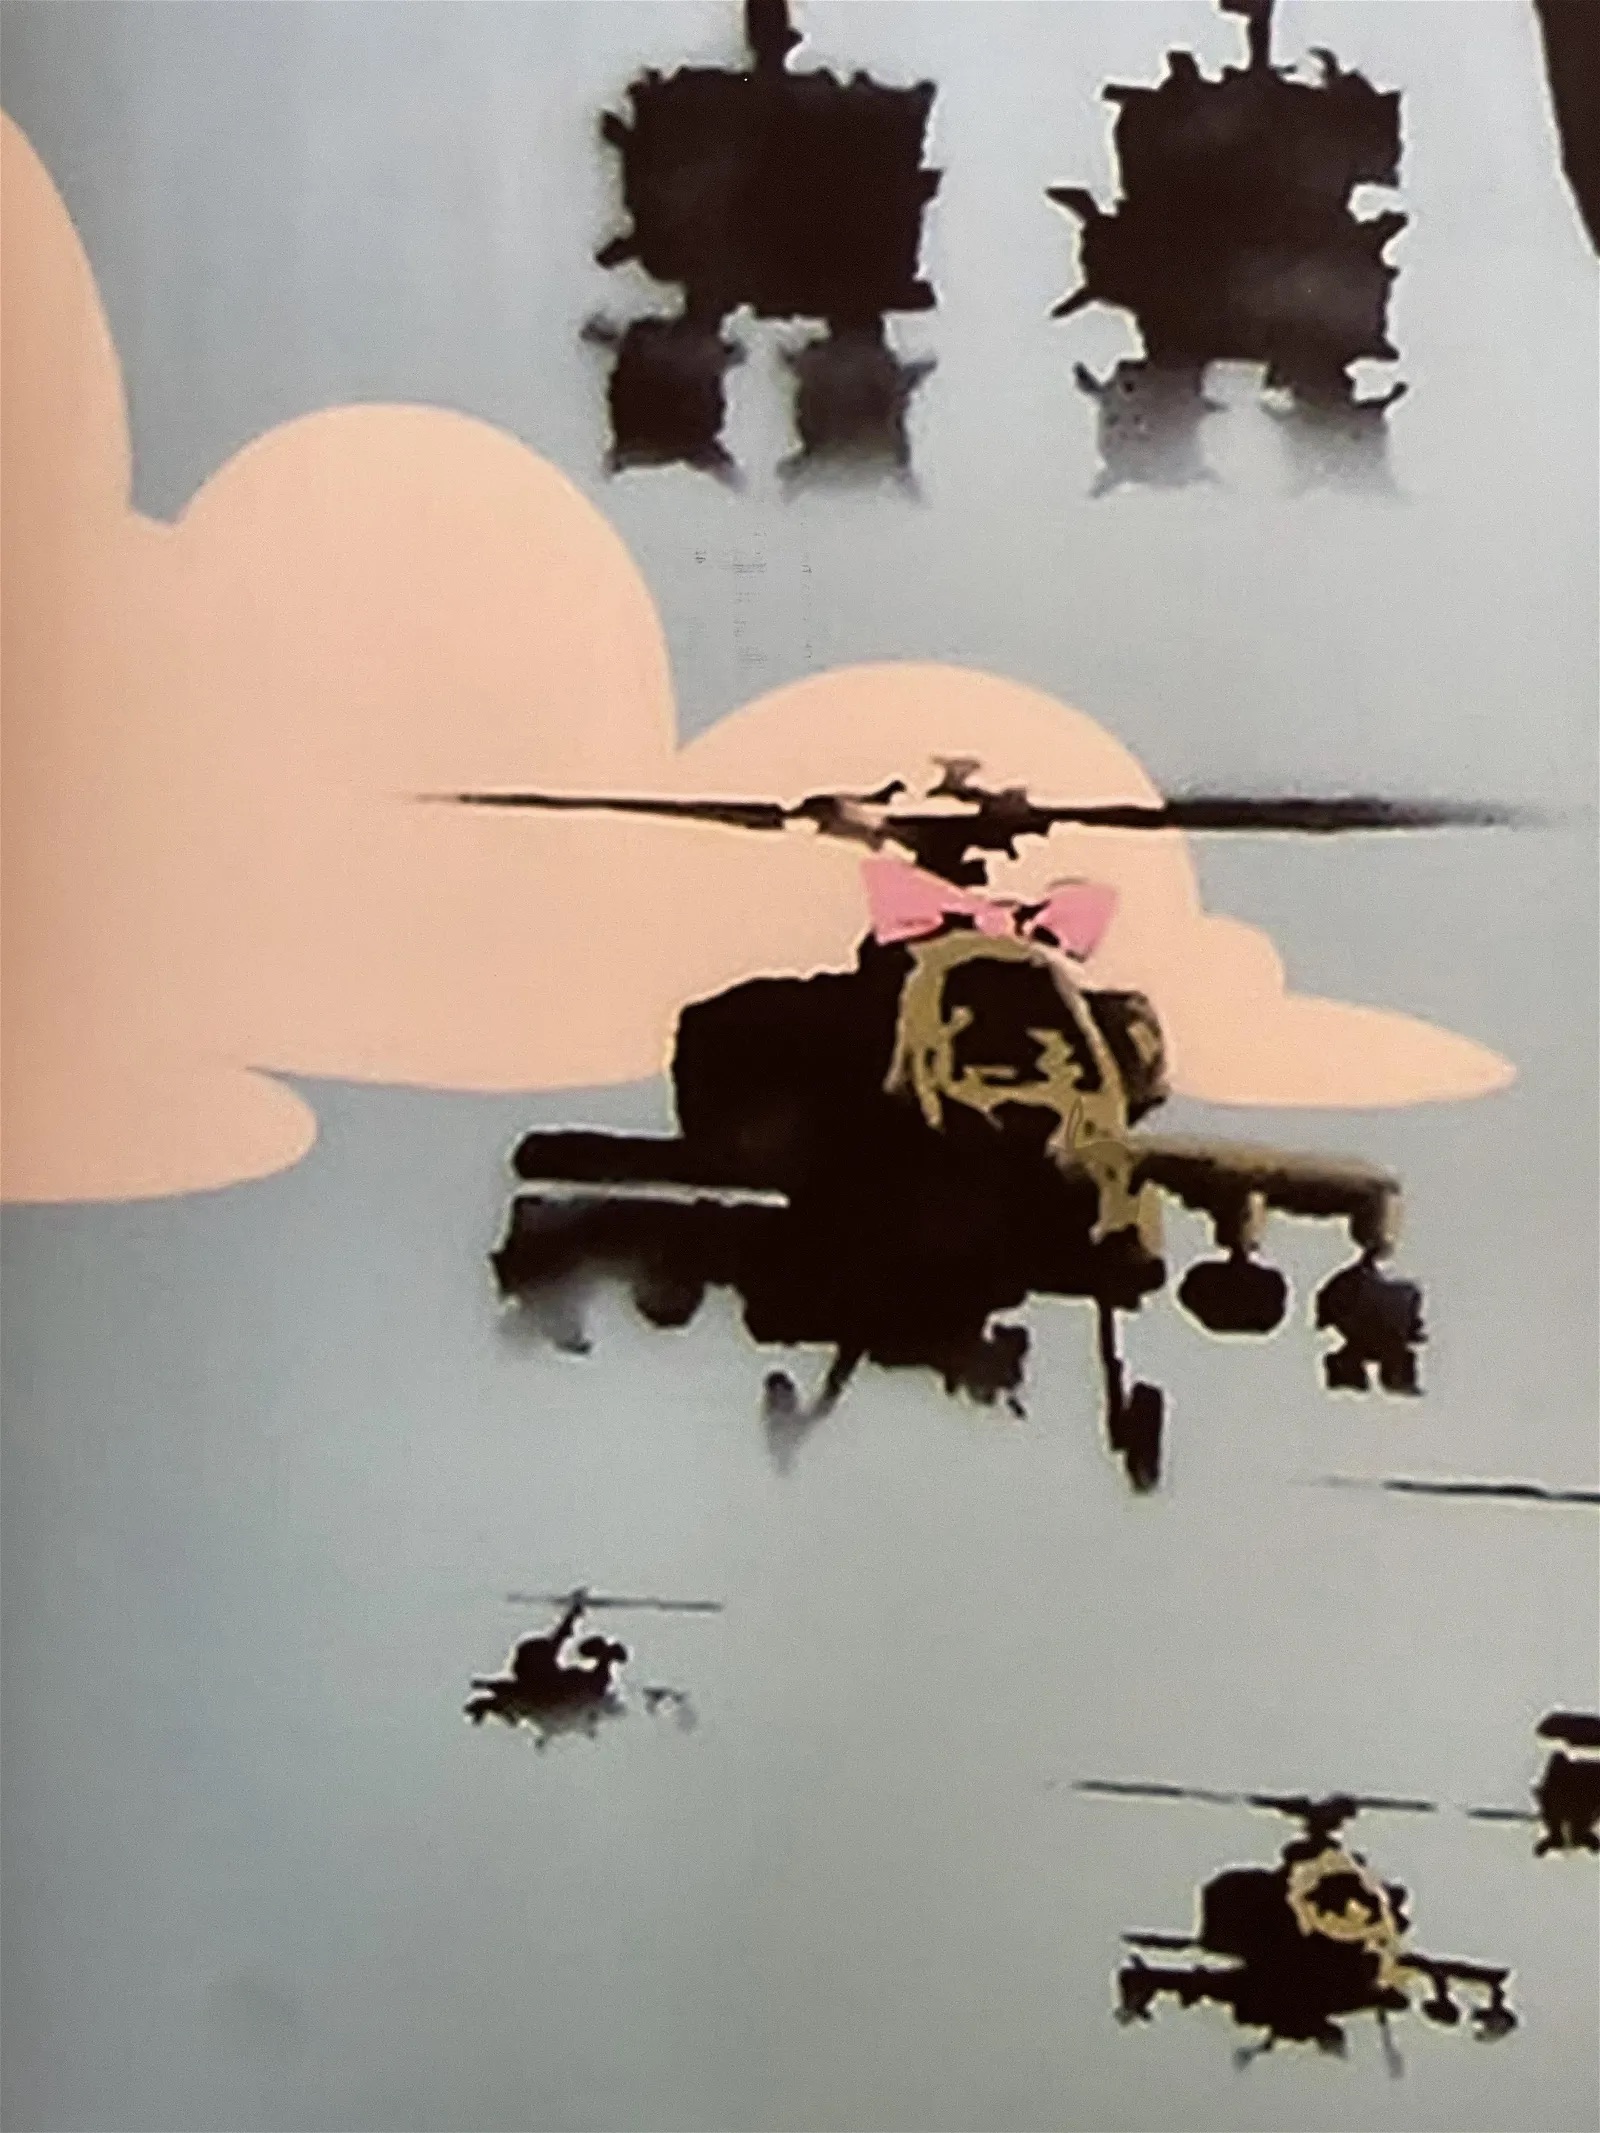 Banksy "Helicopter" Offset Lithograph - Image 7 of 8